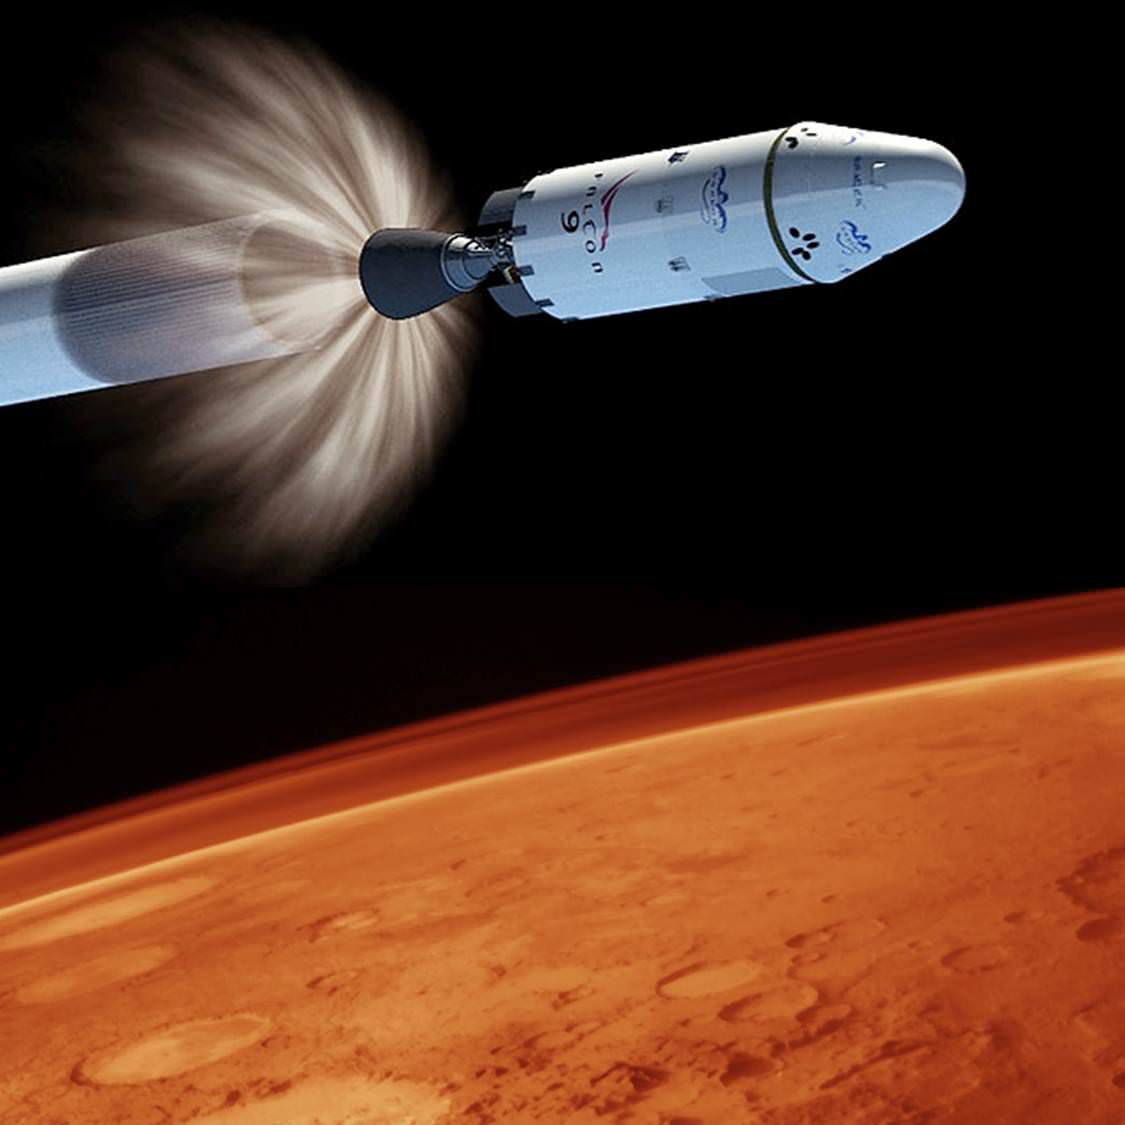 Nuclear-powered rocket could get us to Mars faster